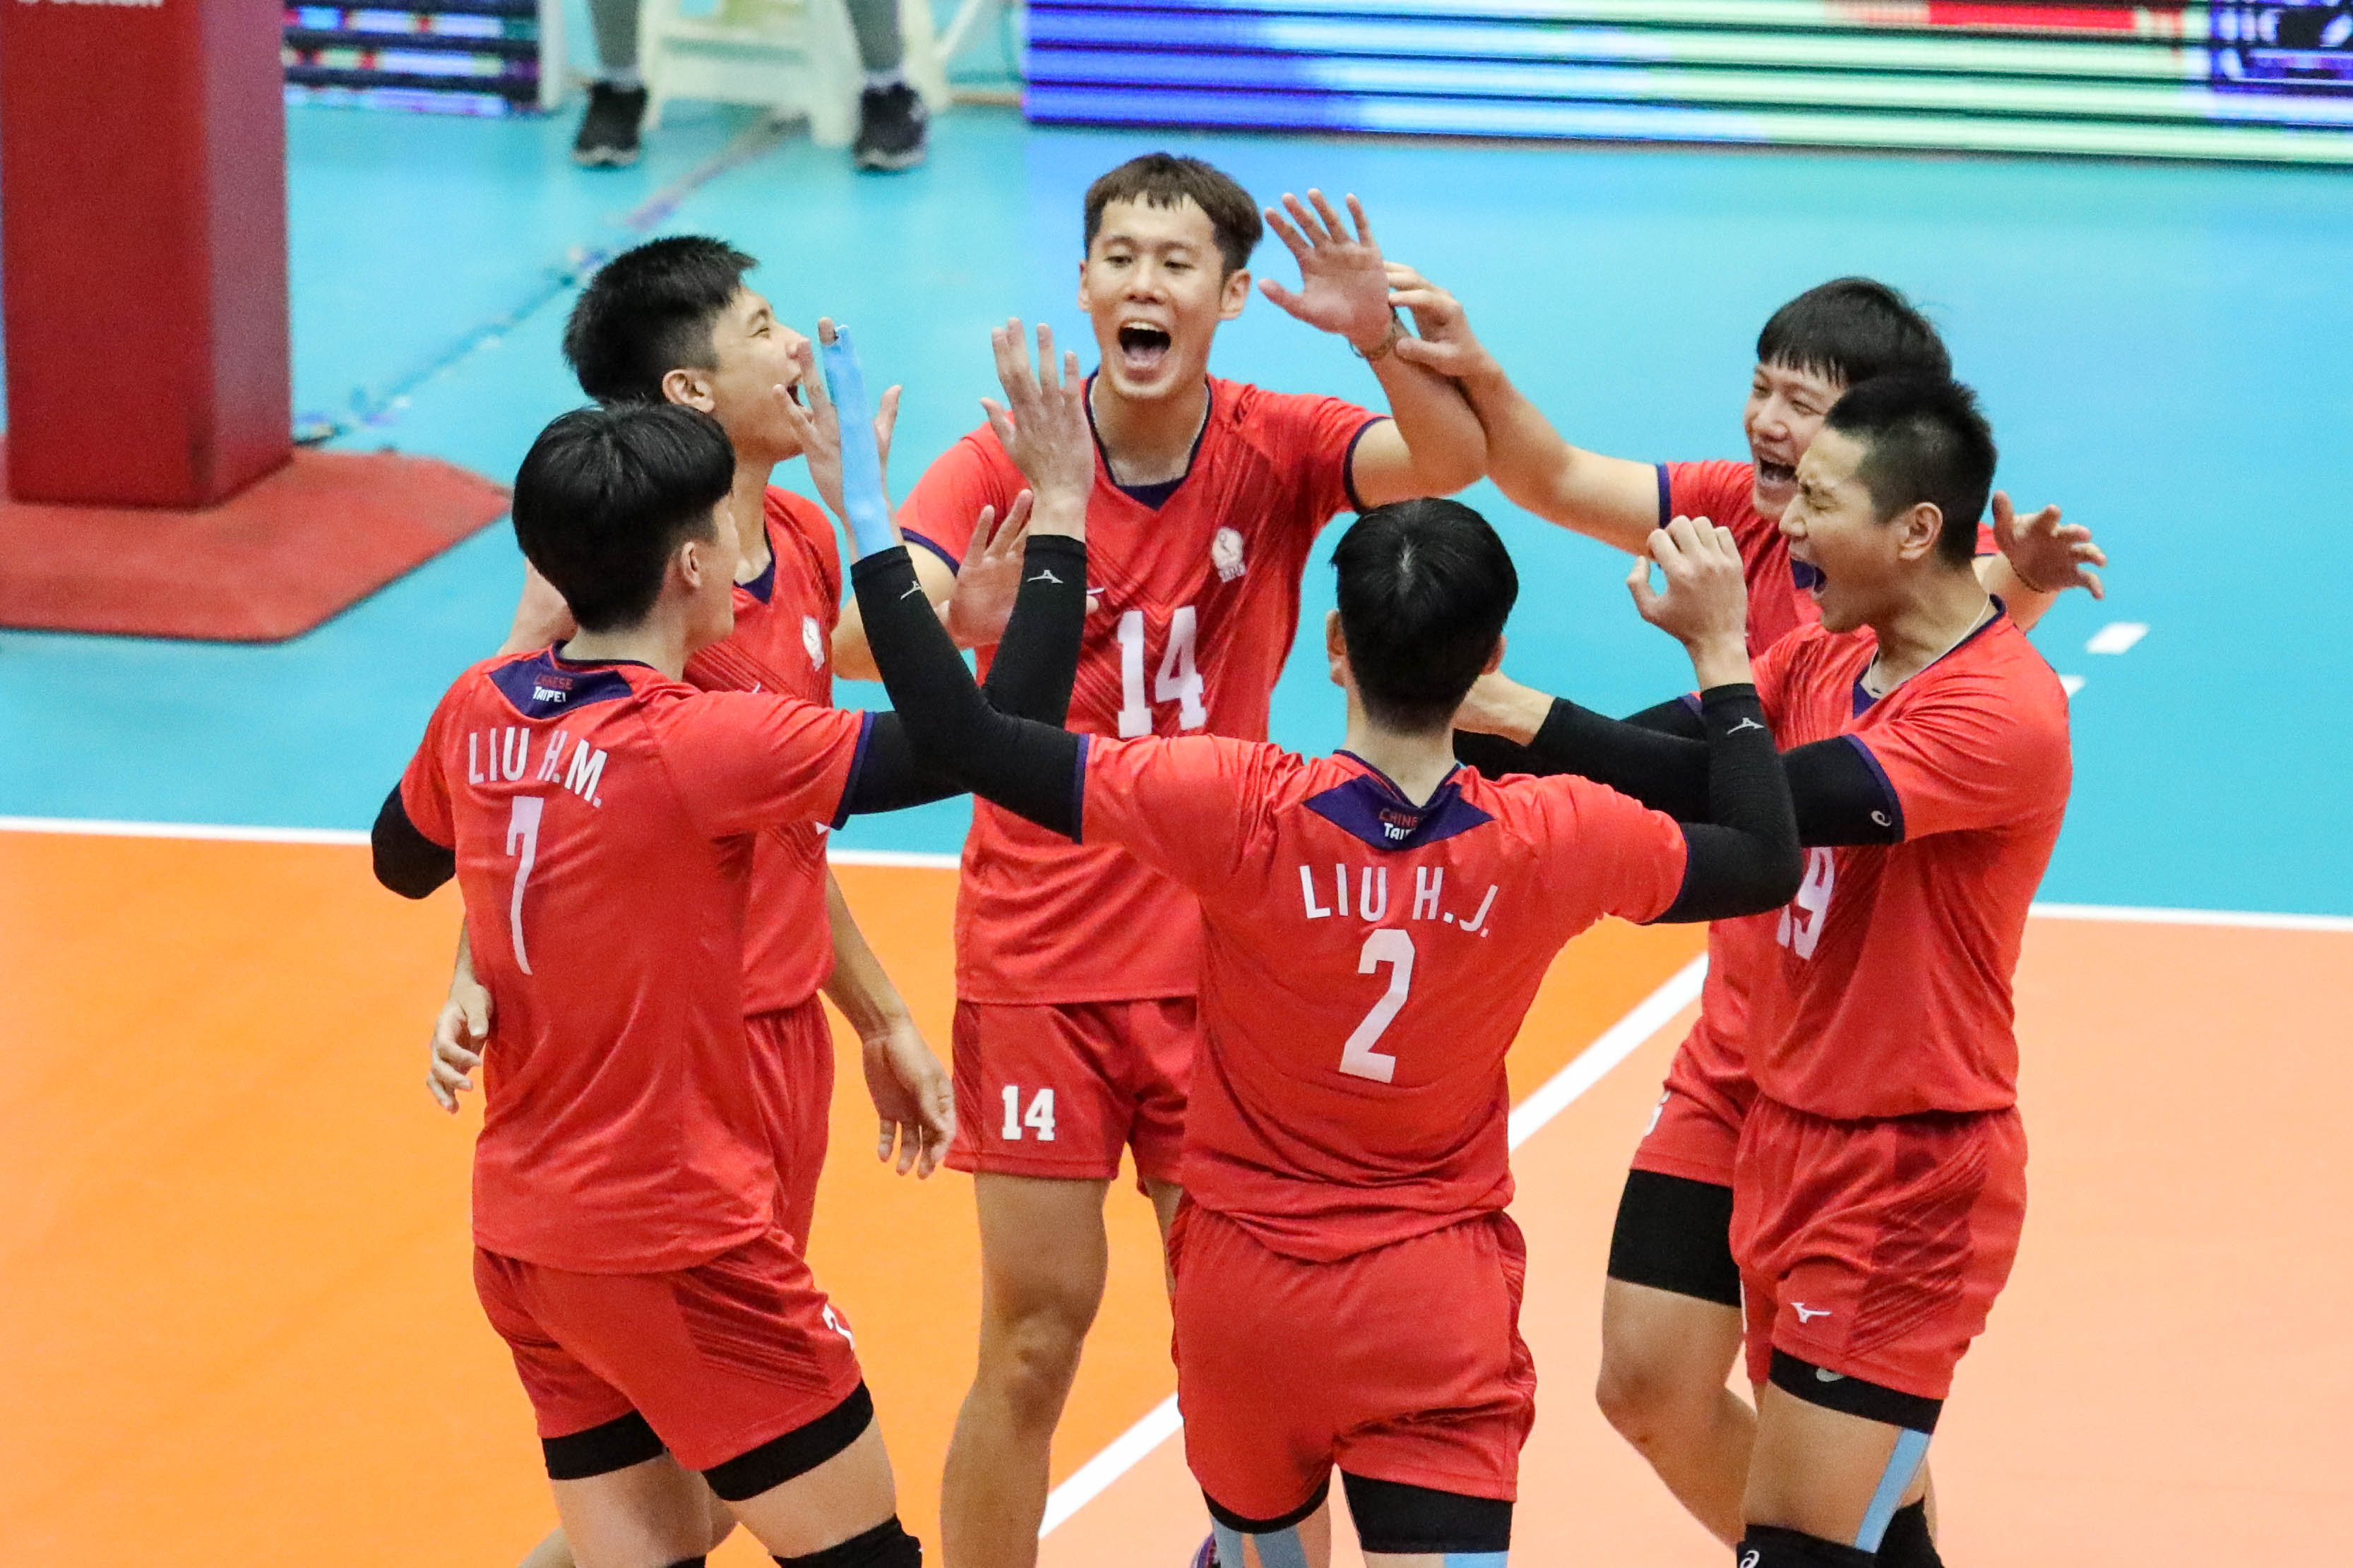 CHINESE TAIPEI CLAIM 5TH PLACE AFTER 3-1 WIN AGAINST CHINA - Asian ...